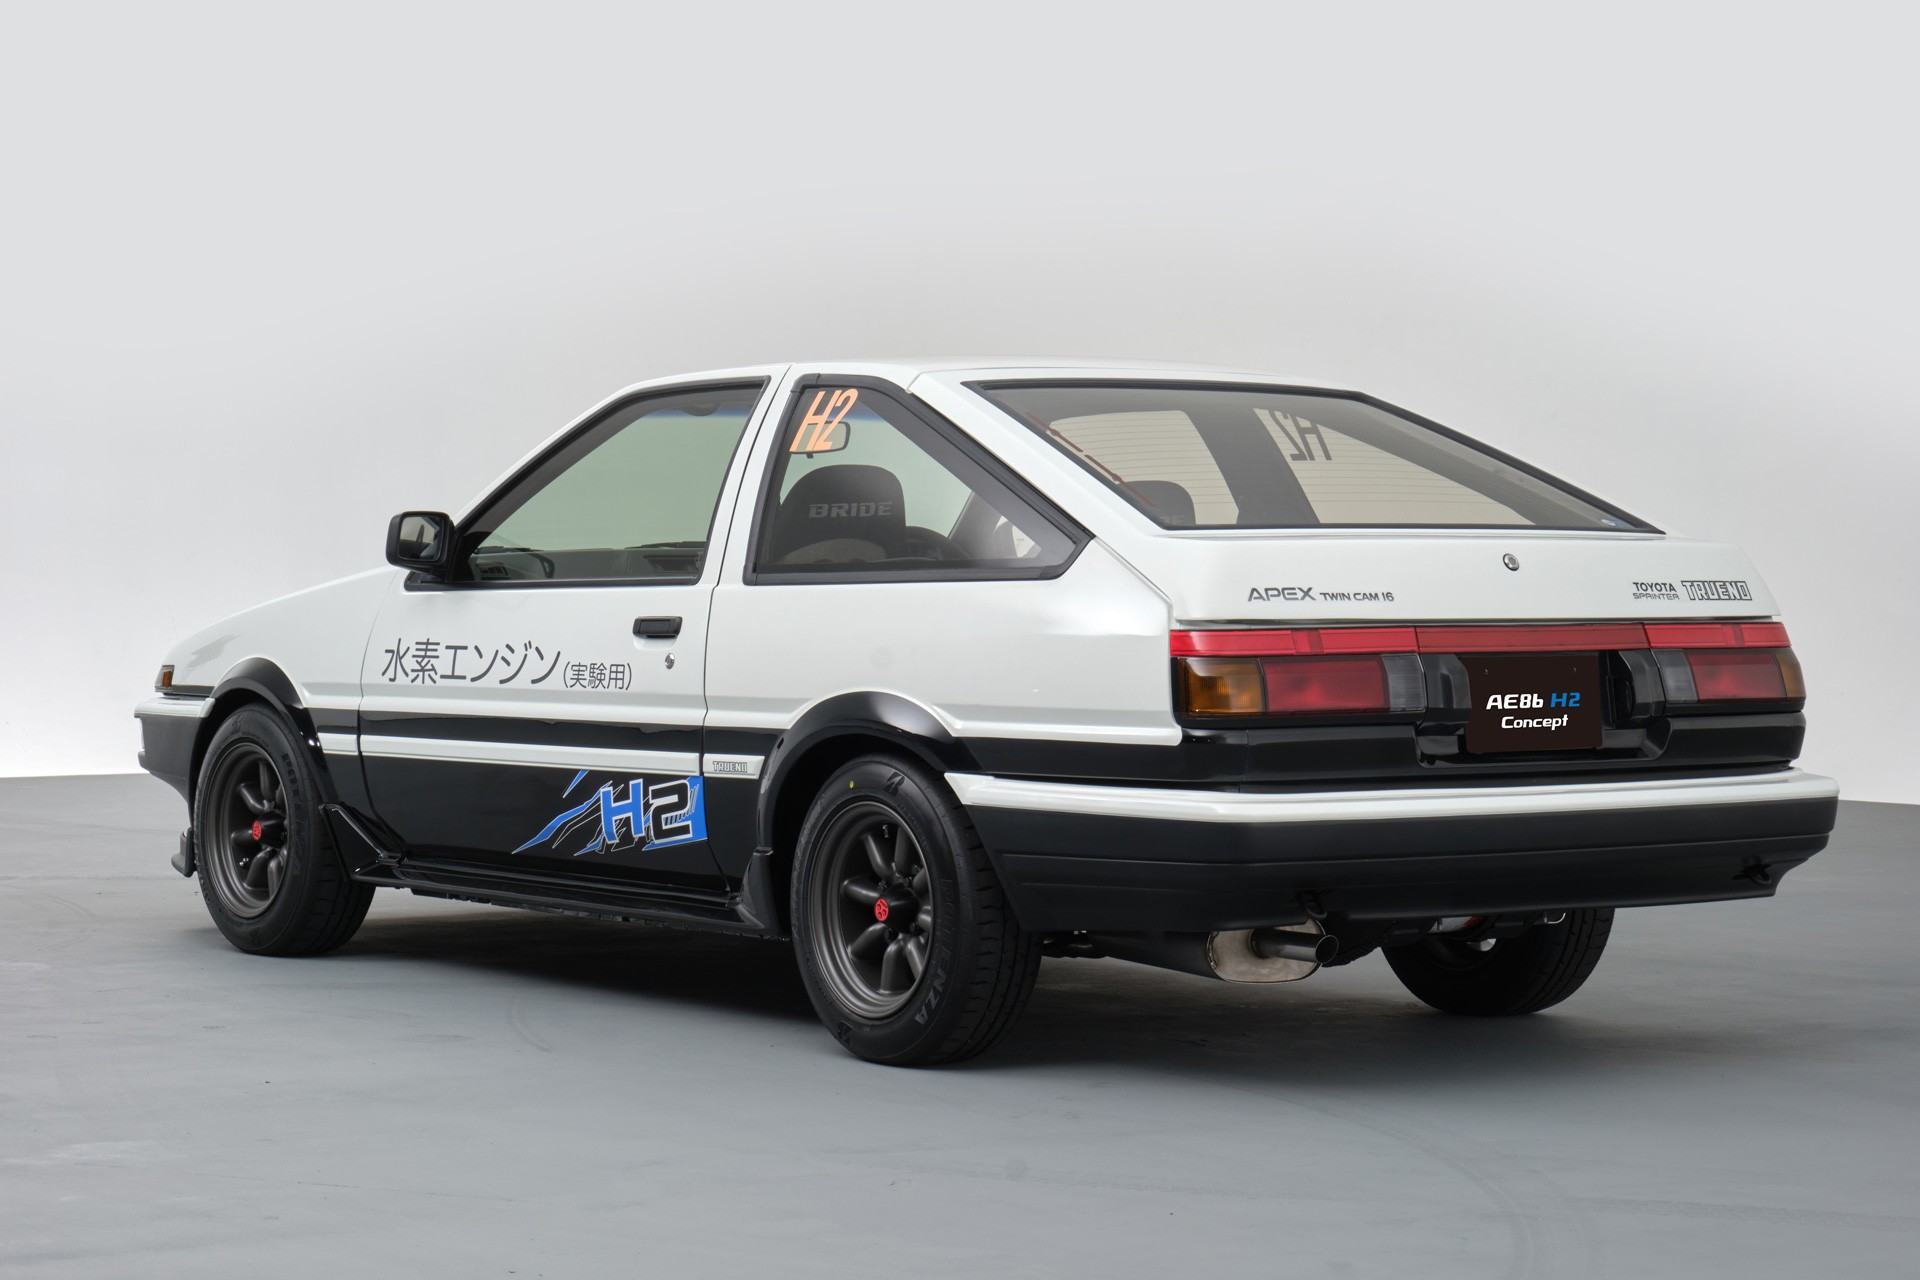 Toyota Revamps Iconic AE86 Classics With Hydrogen and Electric Power at